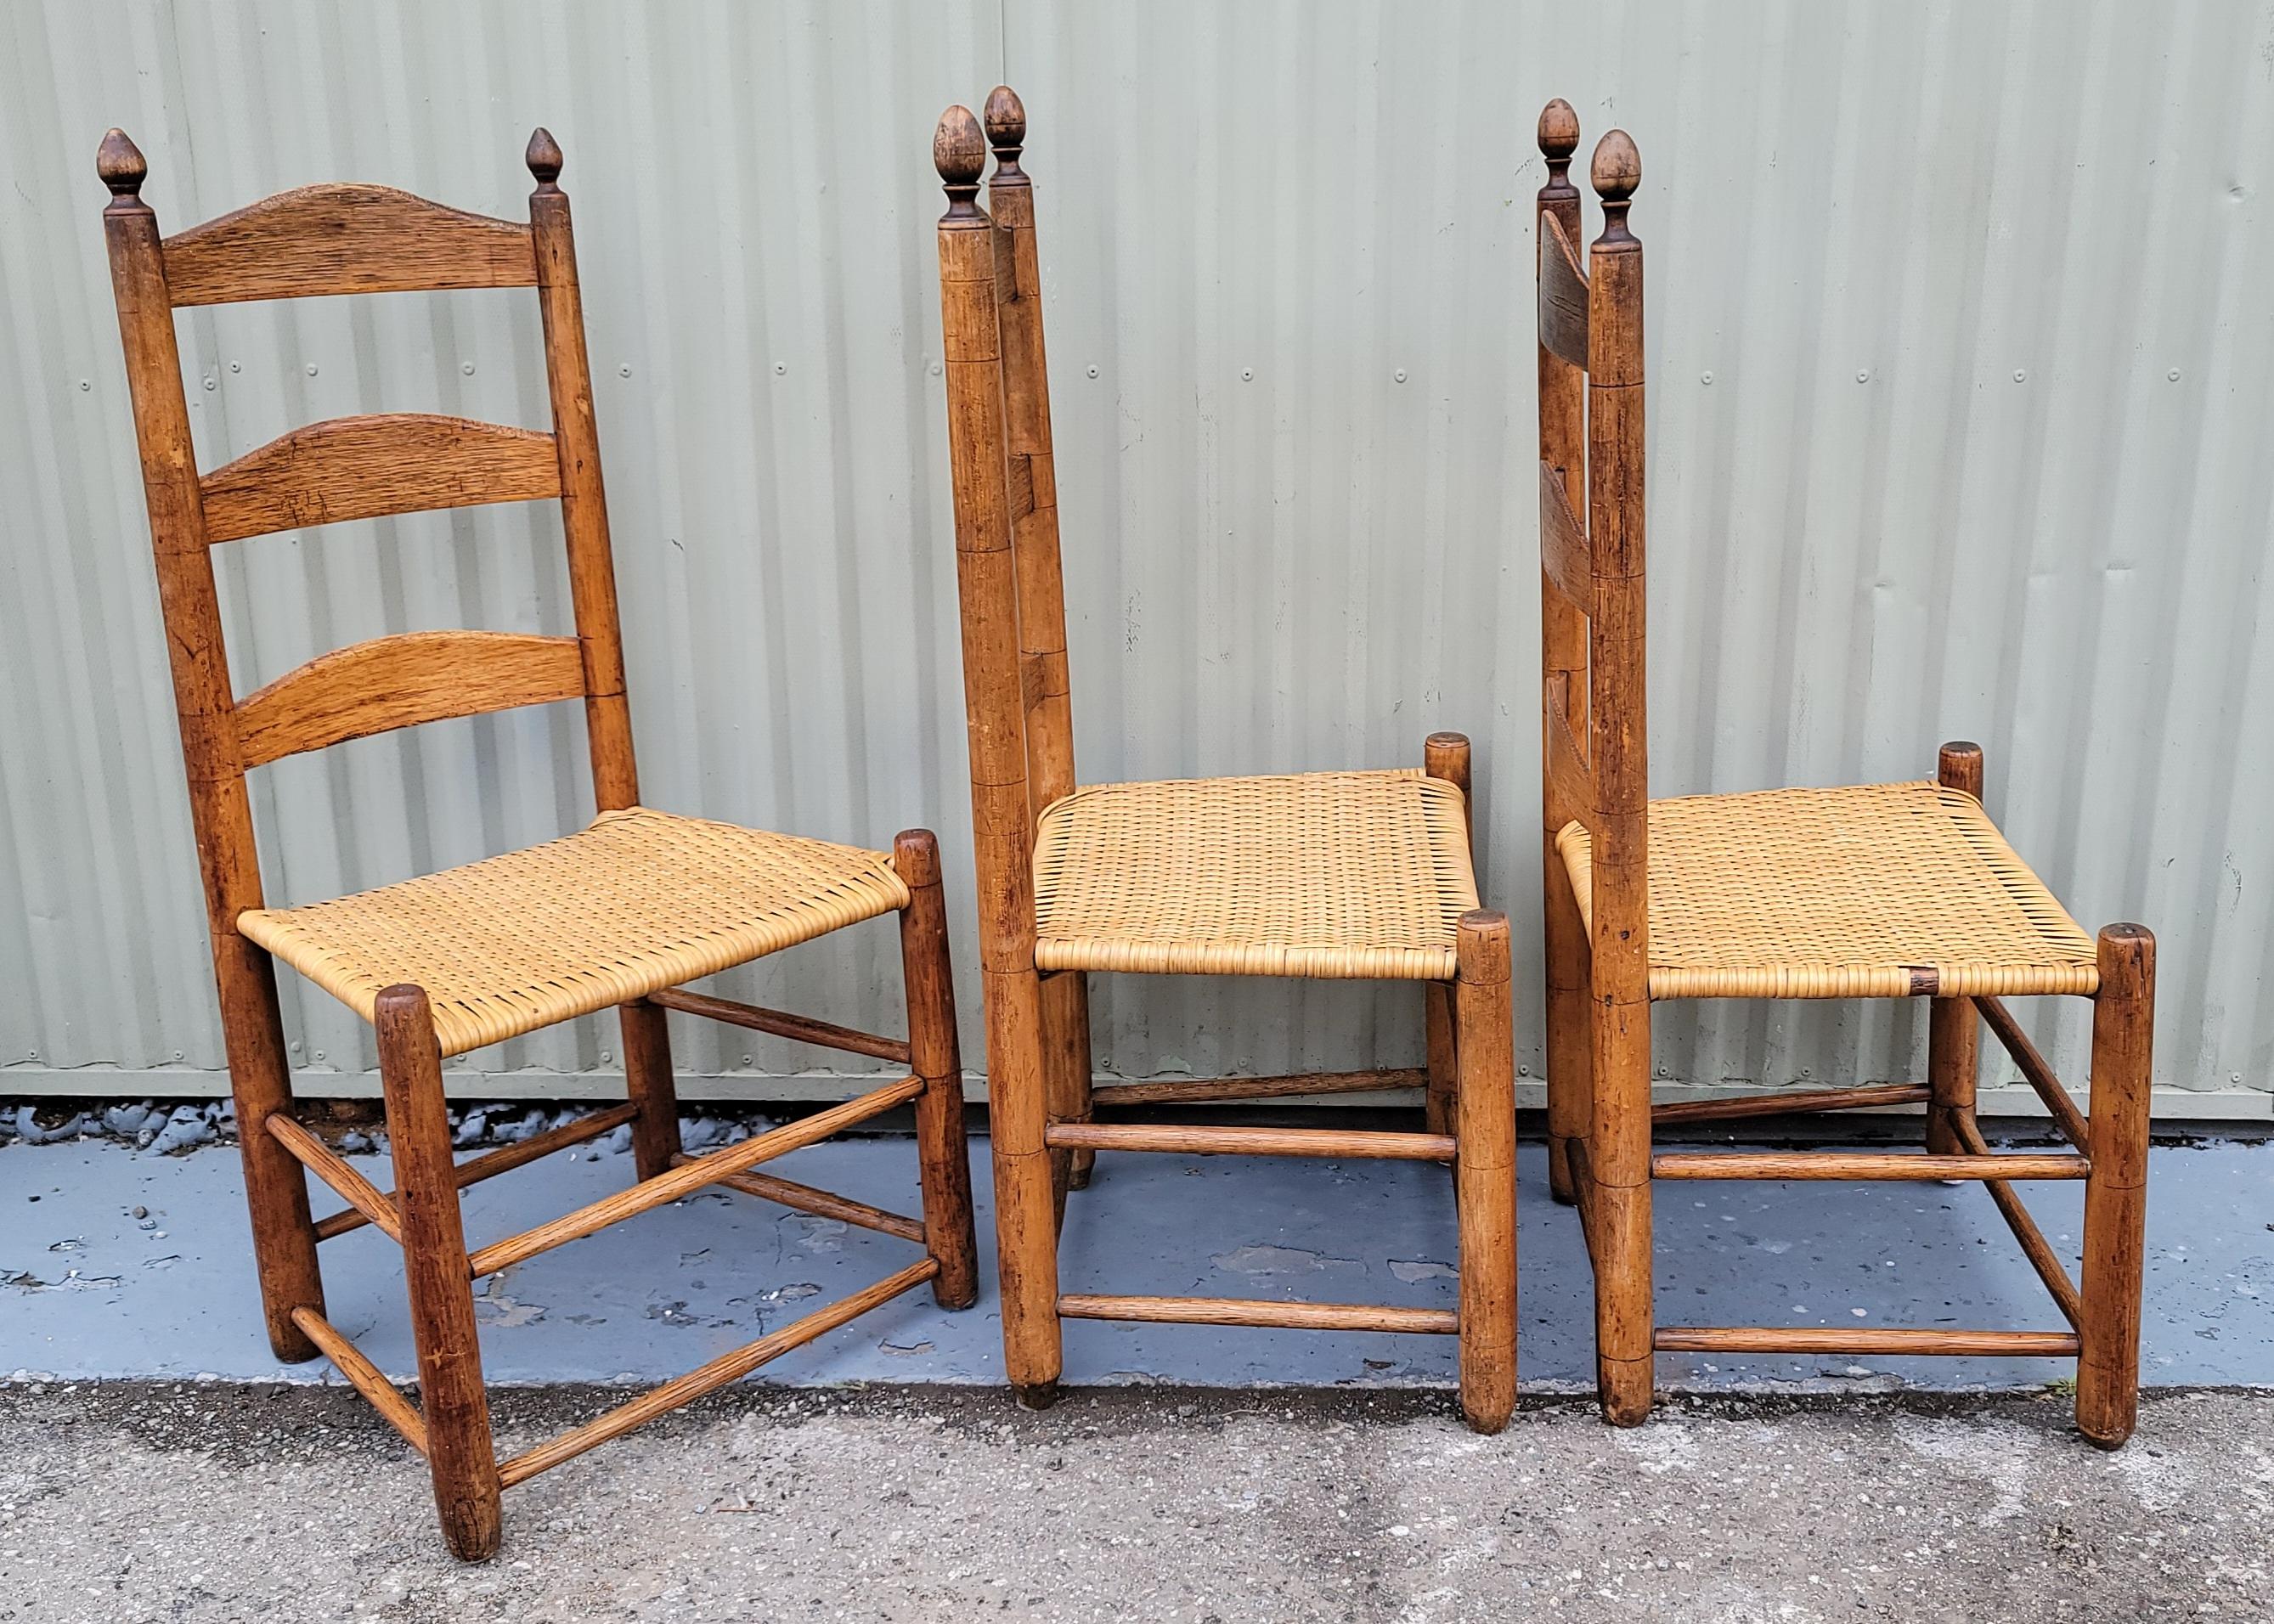 Adirondack 19thc Ladder Back Chairs From Pennsylvania -Set of Three For Sale